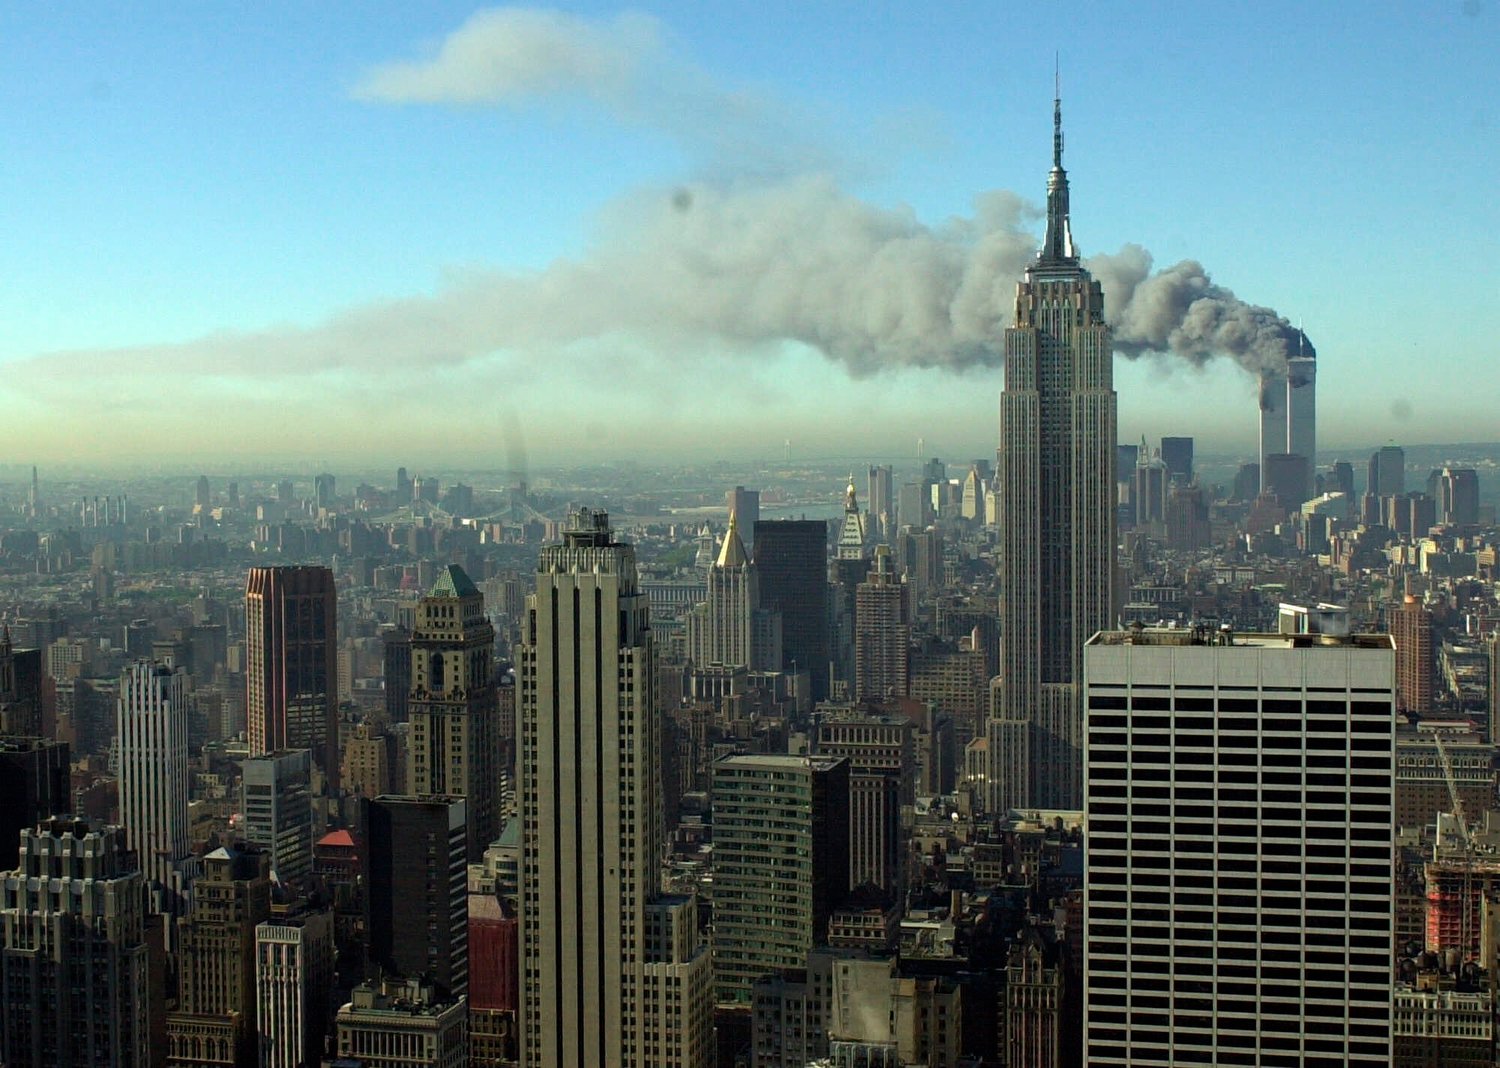 REMEMBERING THE ATTACK — Smoke billows across the New York City skyline after two hijacked planes crashed into the twin towers on Sept. 11, 2001. The Eastern Air Defense Sector, then known as the Northeast Air Defense Sector, played a prominent role responding to the 9/11 attacks. As part of its 20th anniversary memorial efforts, the unit is holding a remembrance ceremony, which will be closed to the public, on Saturday, Sept. 11, at 1 p.m.